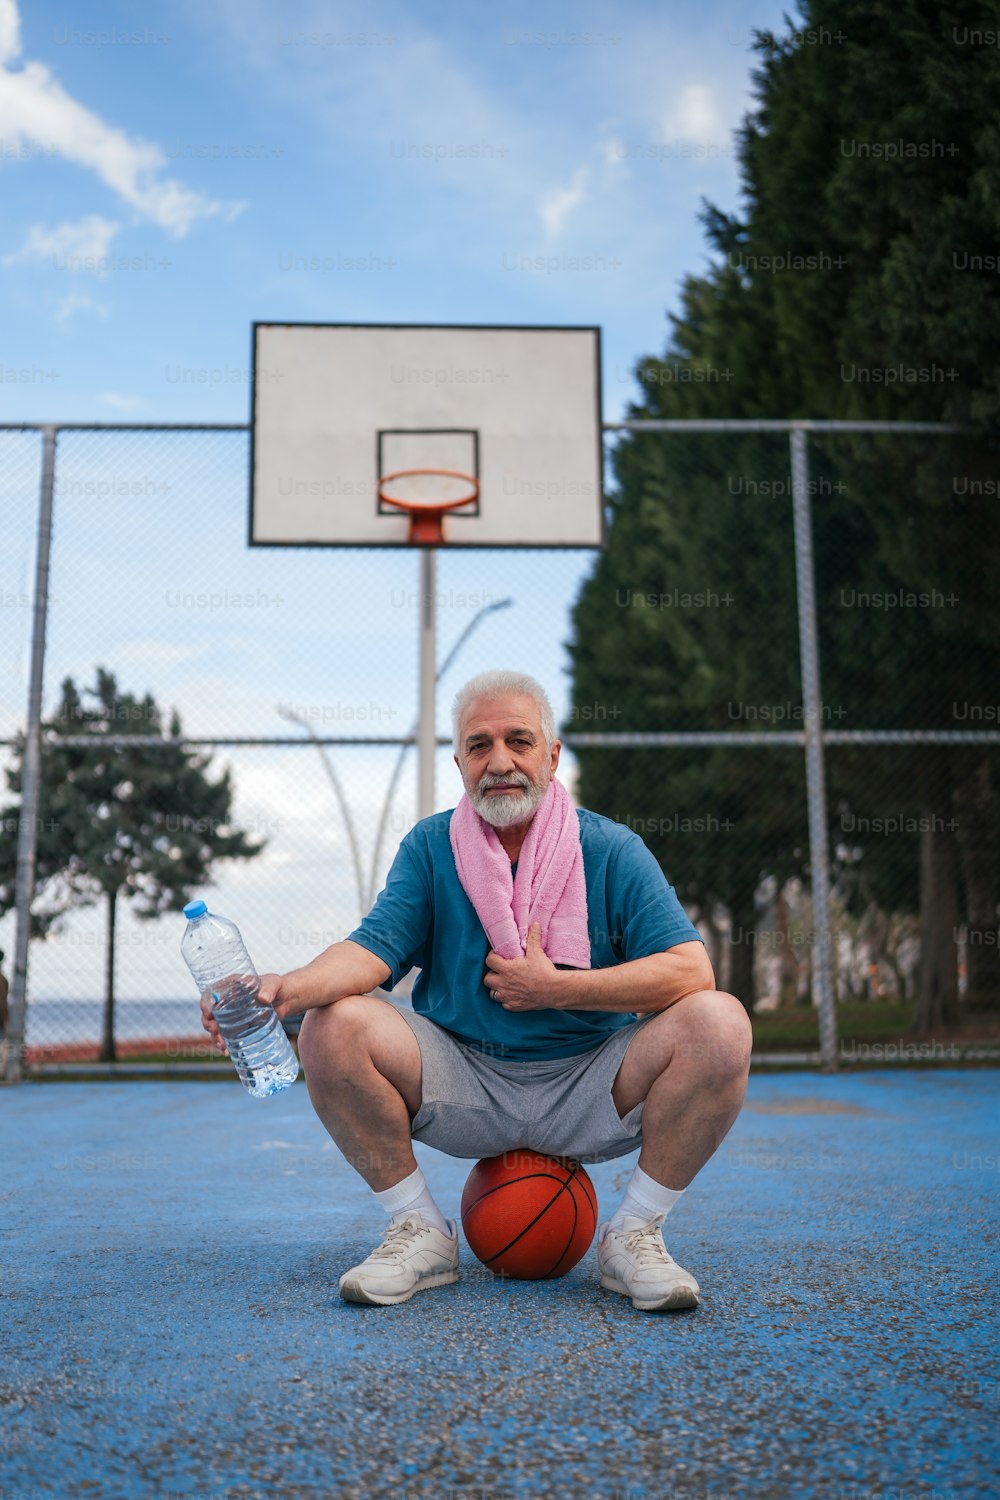 a man sitting on a basketball court holding a water bottle